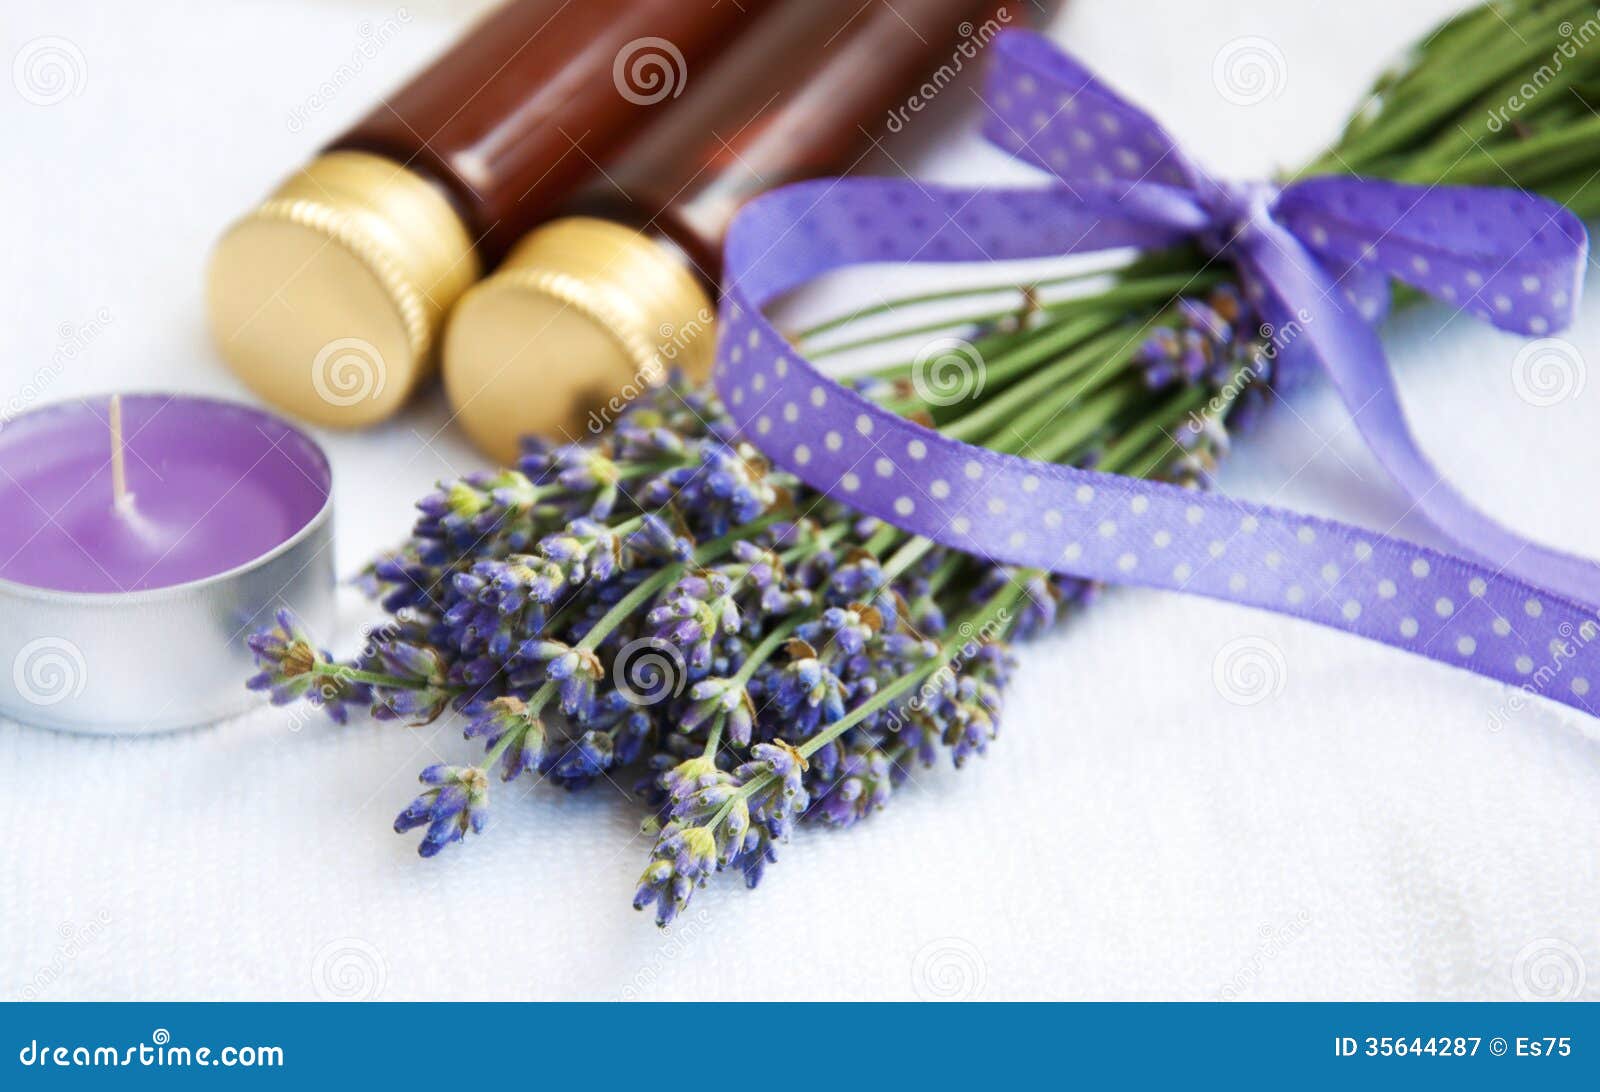 Wellness Products Royalty Free Stock Photography - Image: 35644287